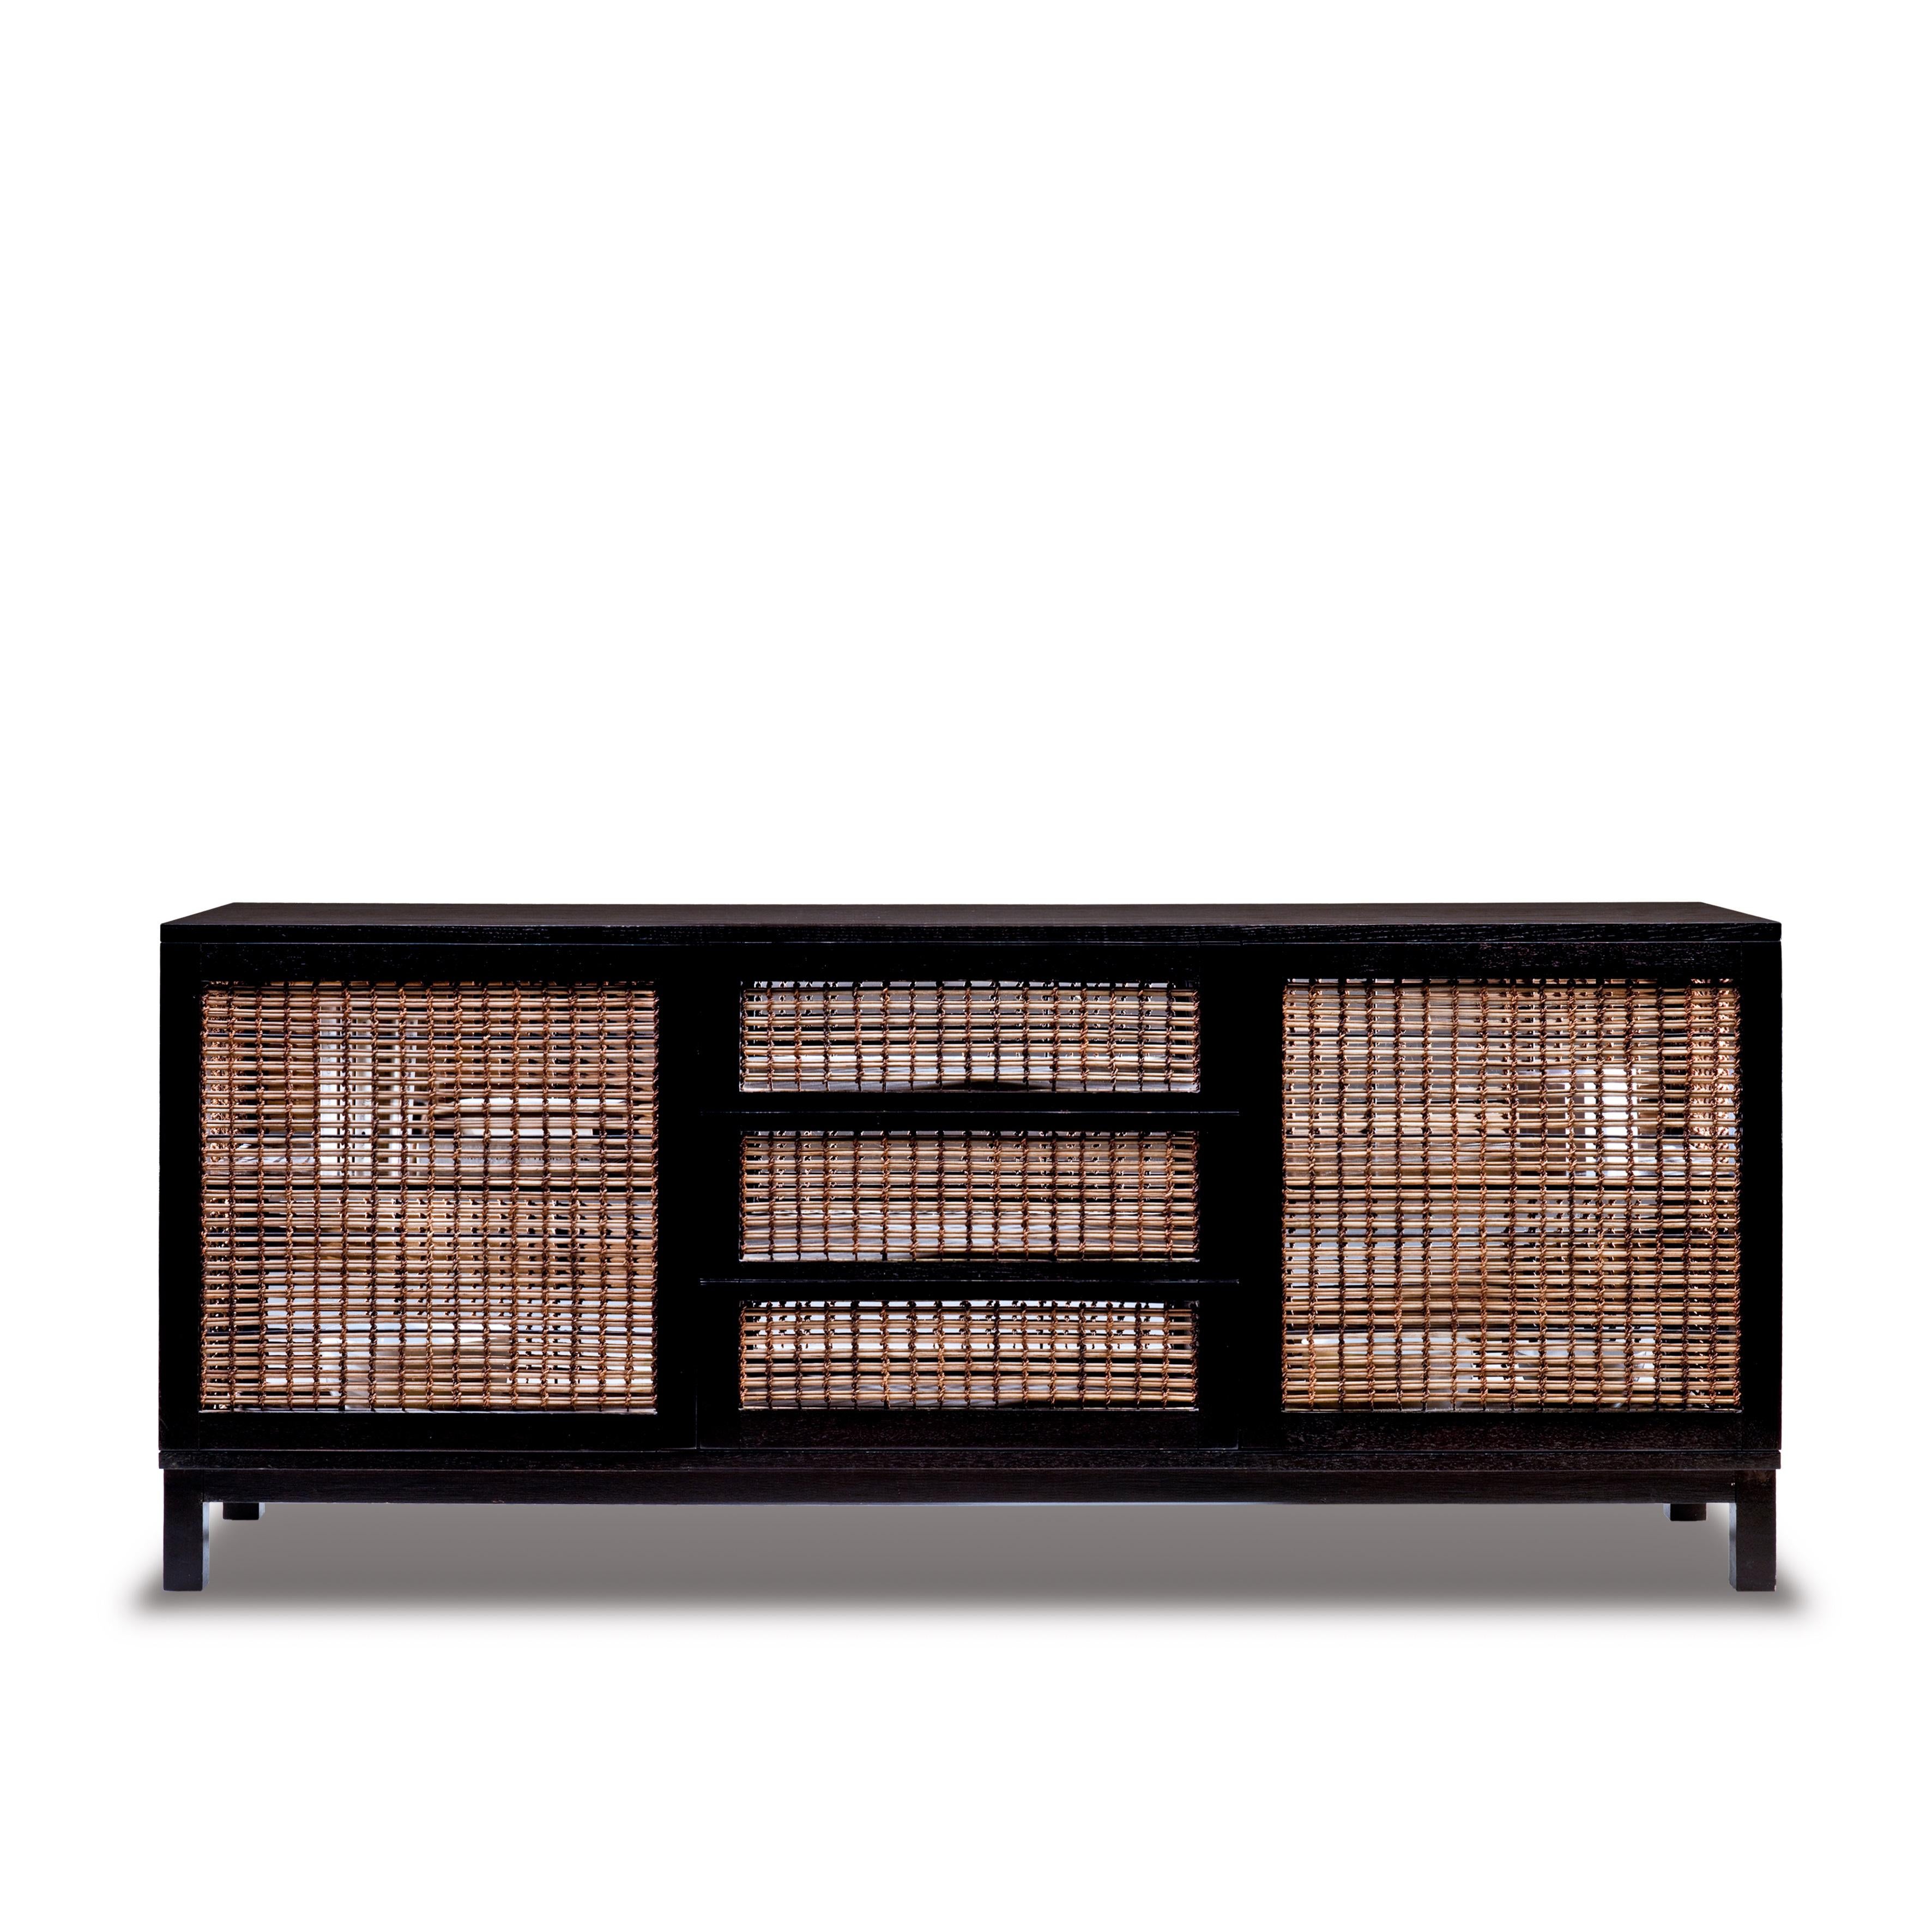 Maple Suzy Wong buffet cabinet by Kenneth Cobonpue.
Materials: Abaca, rattan, maple. 
Also available in walnut.
Dimensions: 50 cm x 180 cm x H 77 cm

Woven panels create a feeling of intimacy as you and your guests indulge in conversation or